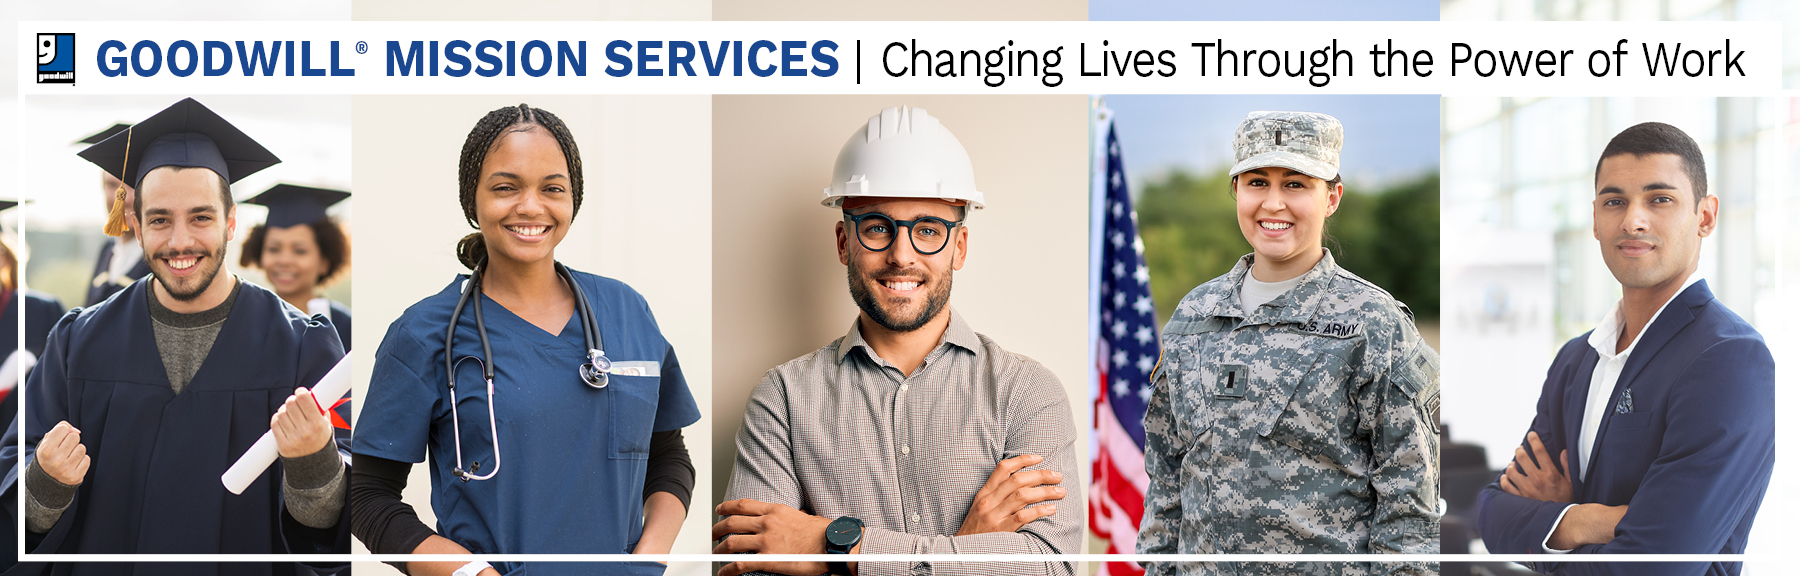 Goodwill Mission Services Changing Lives Through the Power of Work Banner. Starting left, College Grad Male, Nurse Female, Construction Worker Male, Veteran Female, Business Owner Male